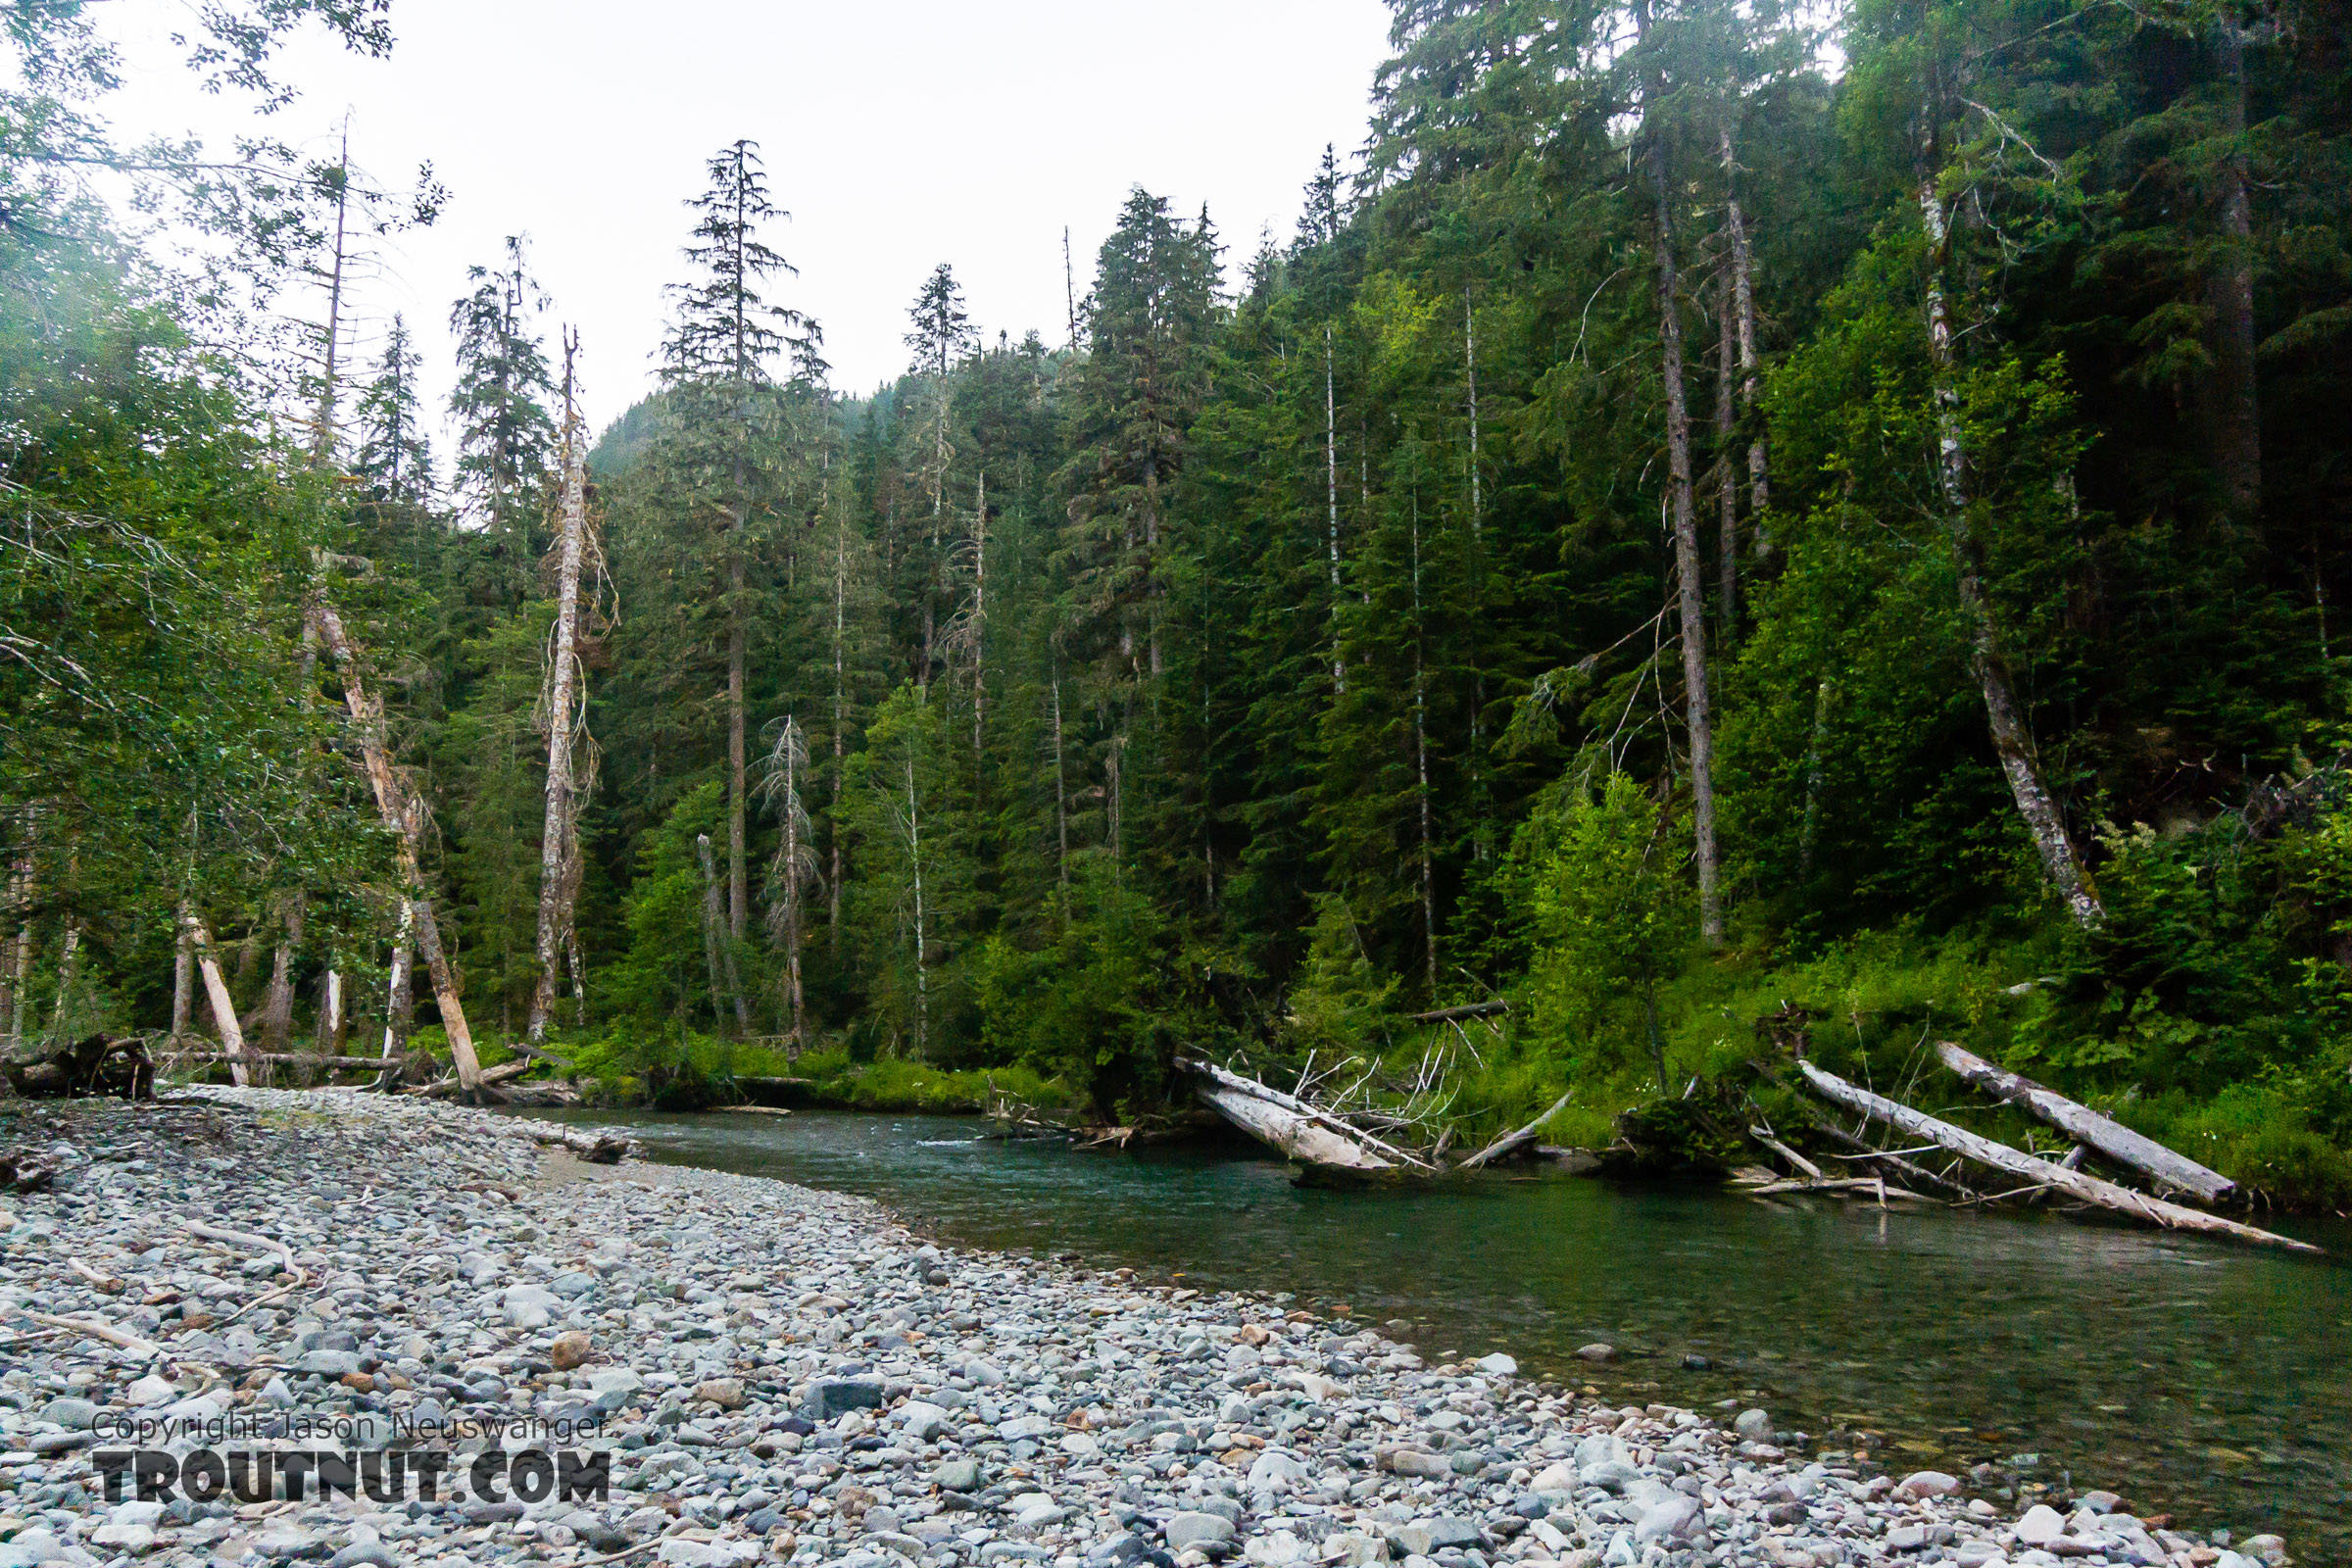  From the South Fork Sauk River in Washington.